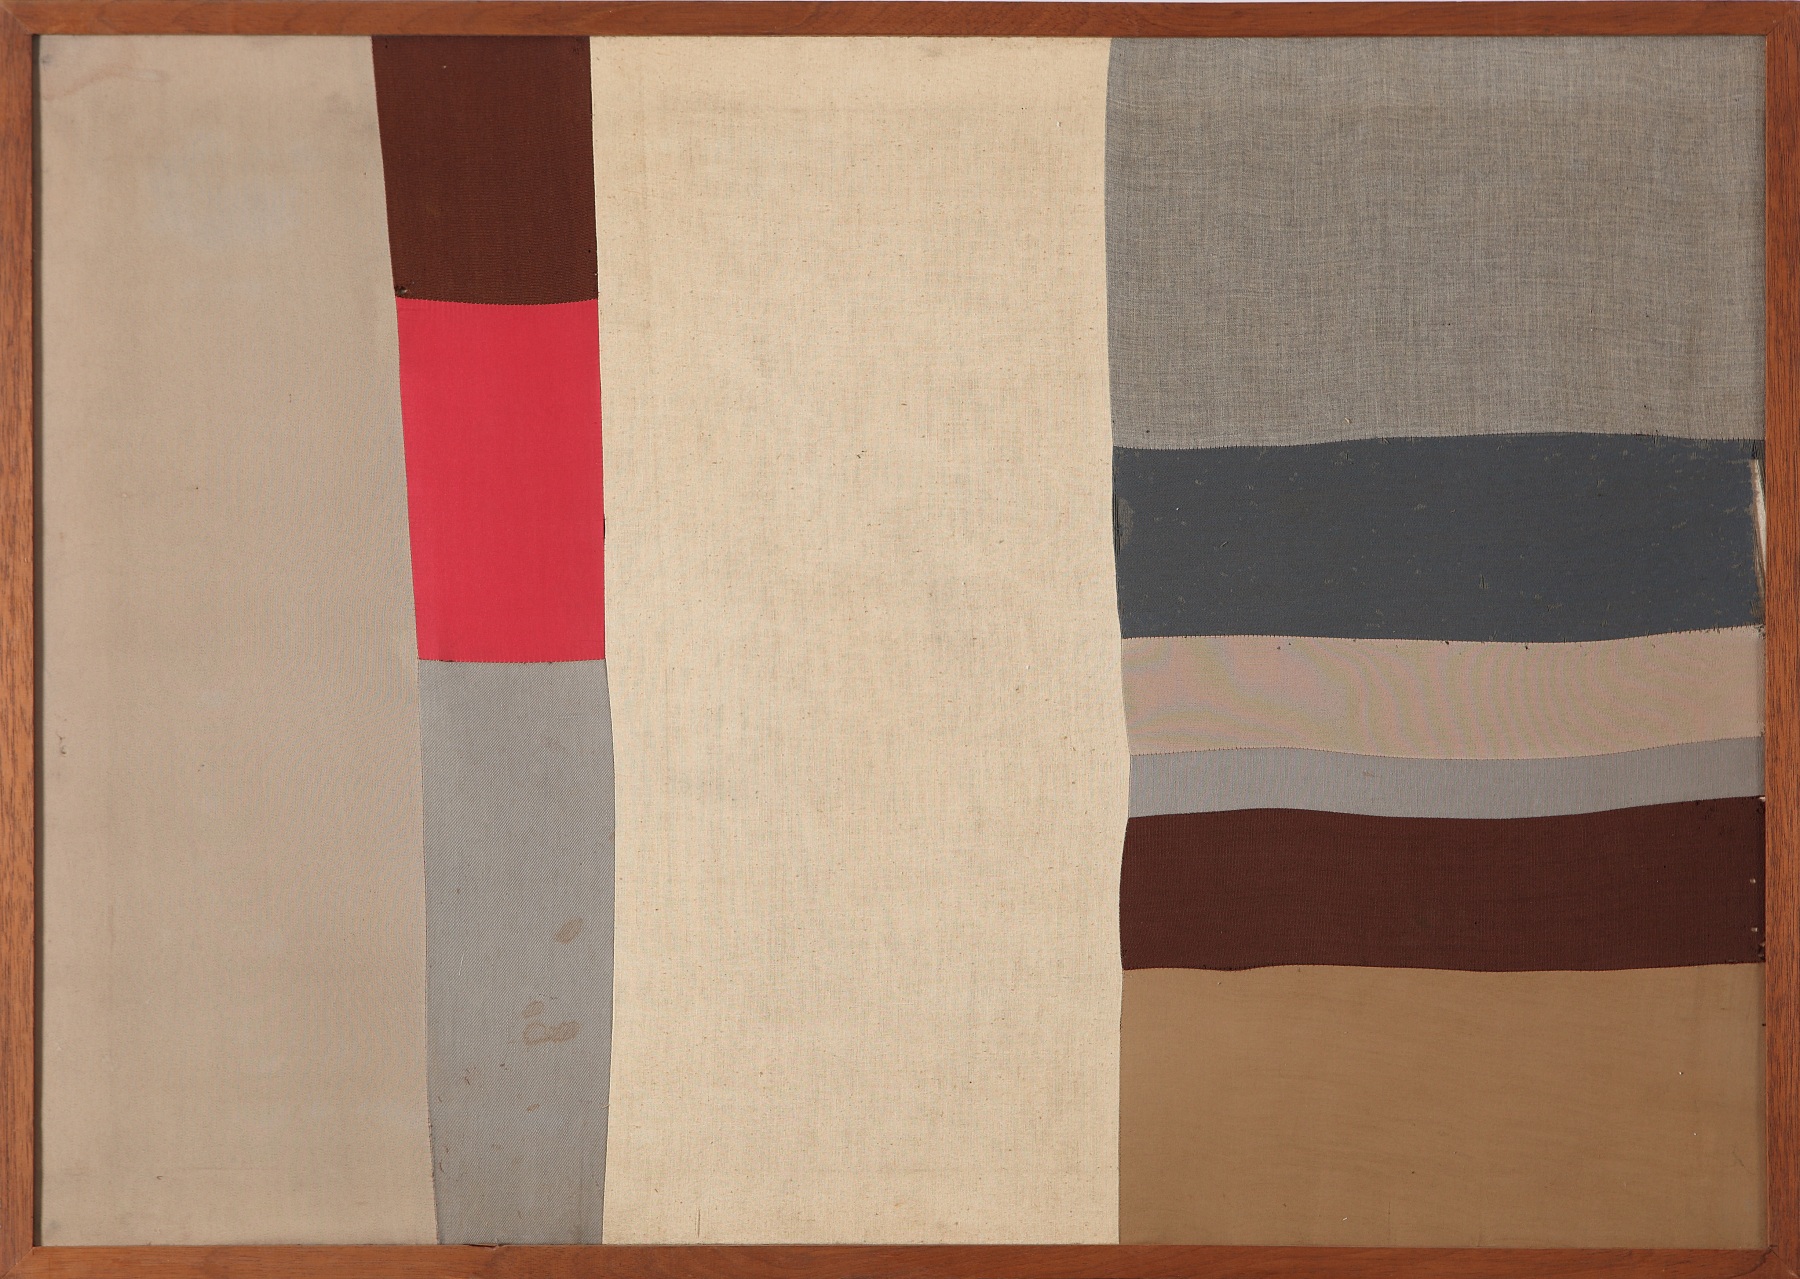 Nuvolo (Giorgio Ascani). Untitled. 1959. Painted and sewn canvas, 71 by 100 cm (28 by 39⅜ in.)